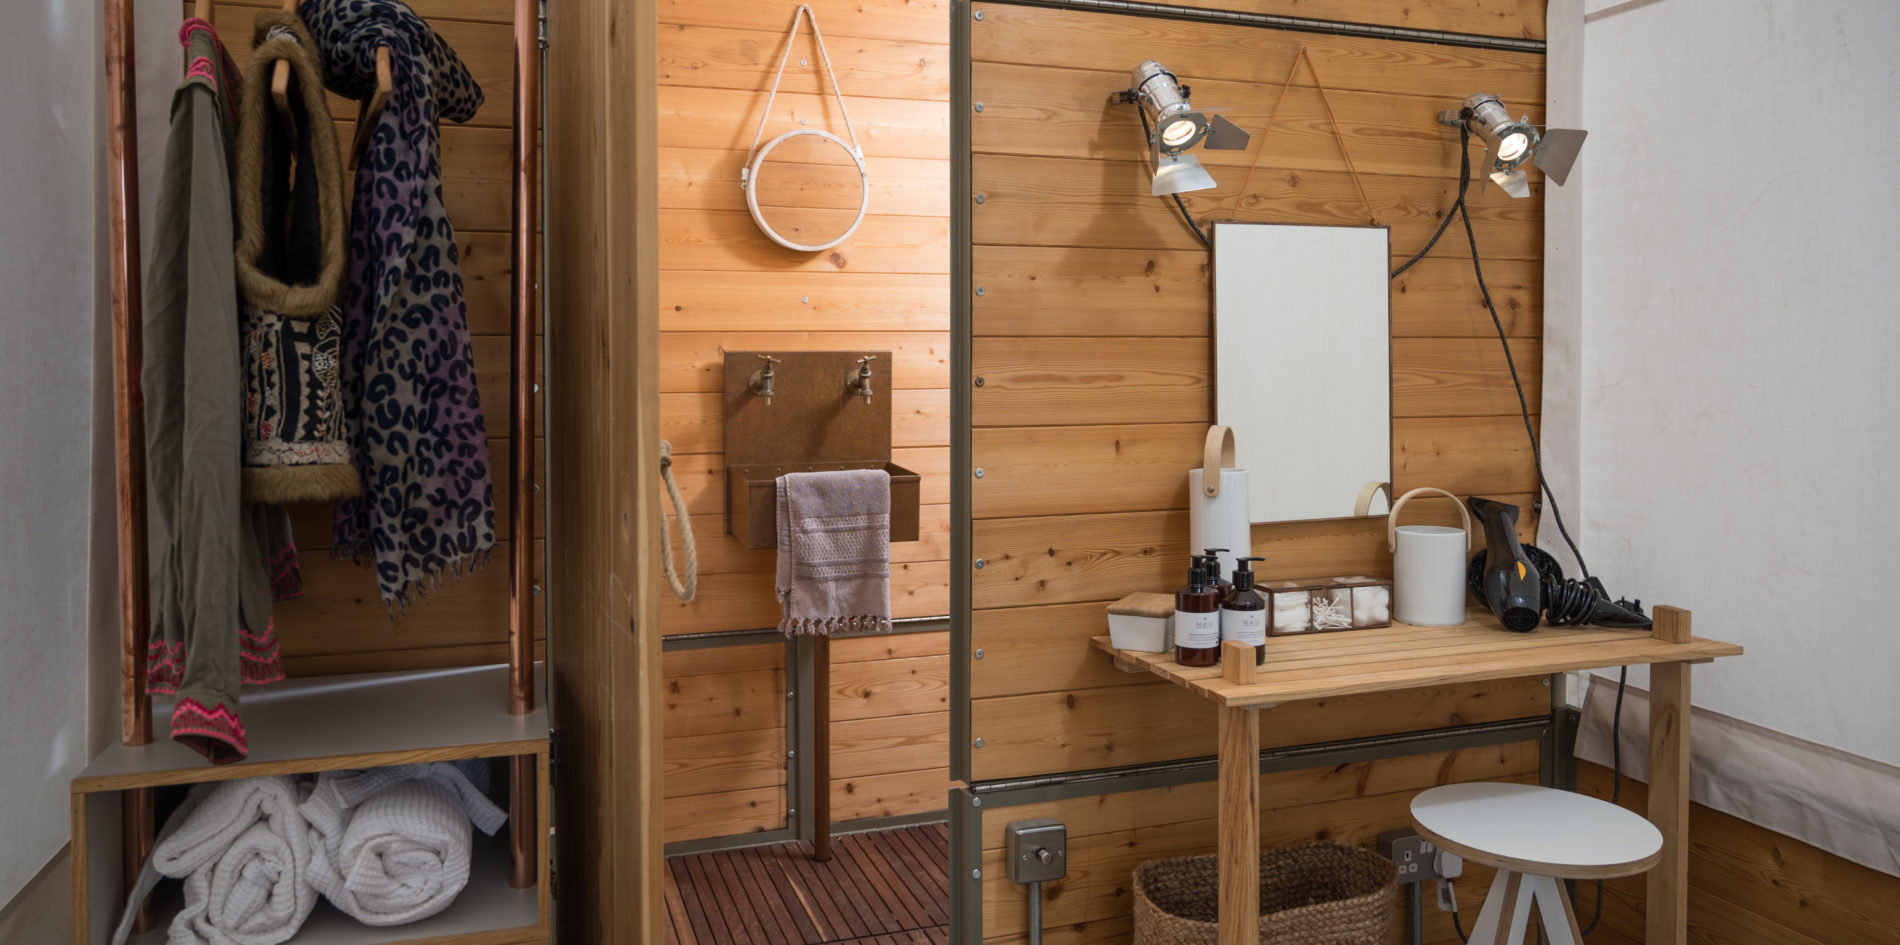 shower area details - luxury suite luxury camping accommodation